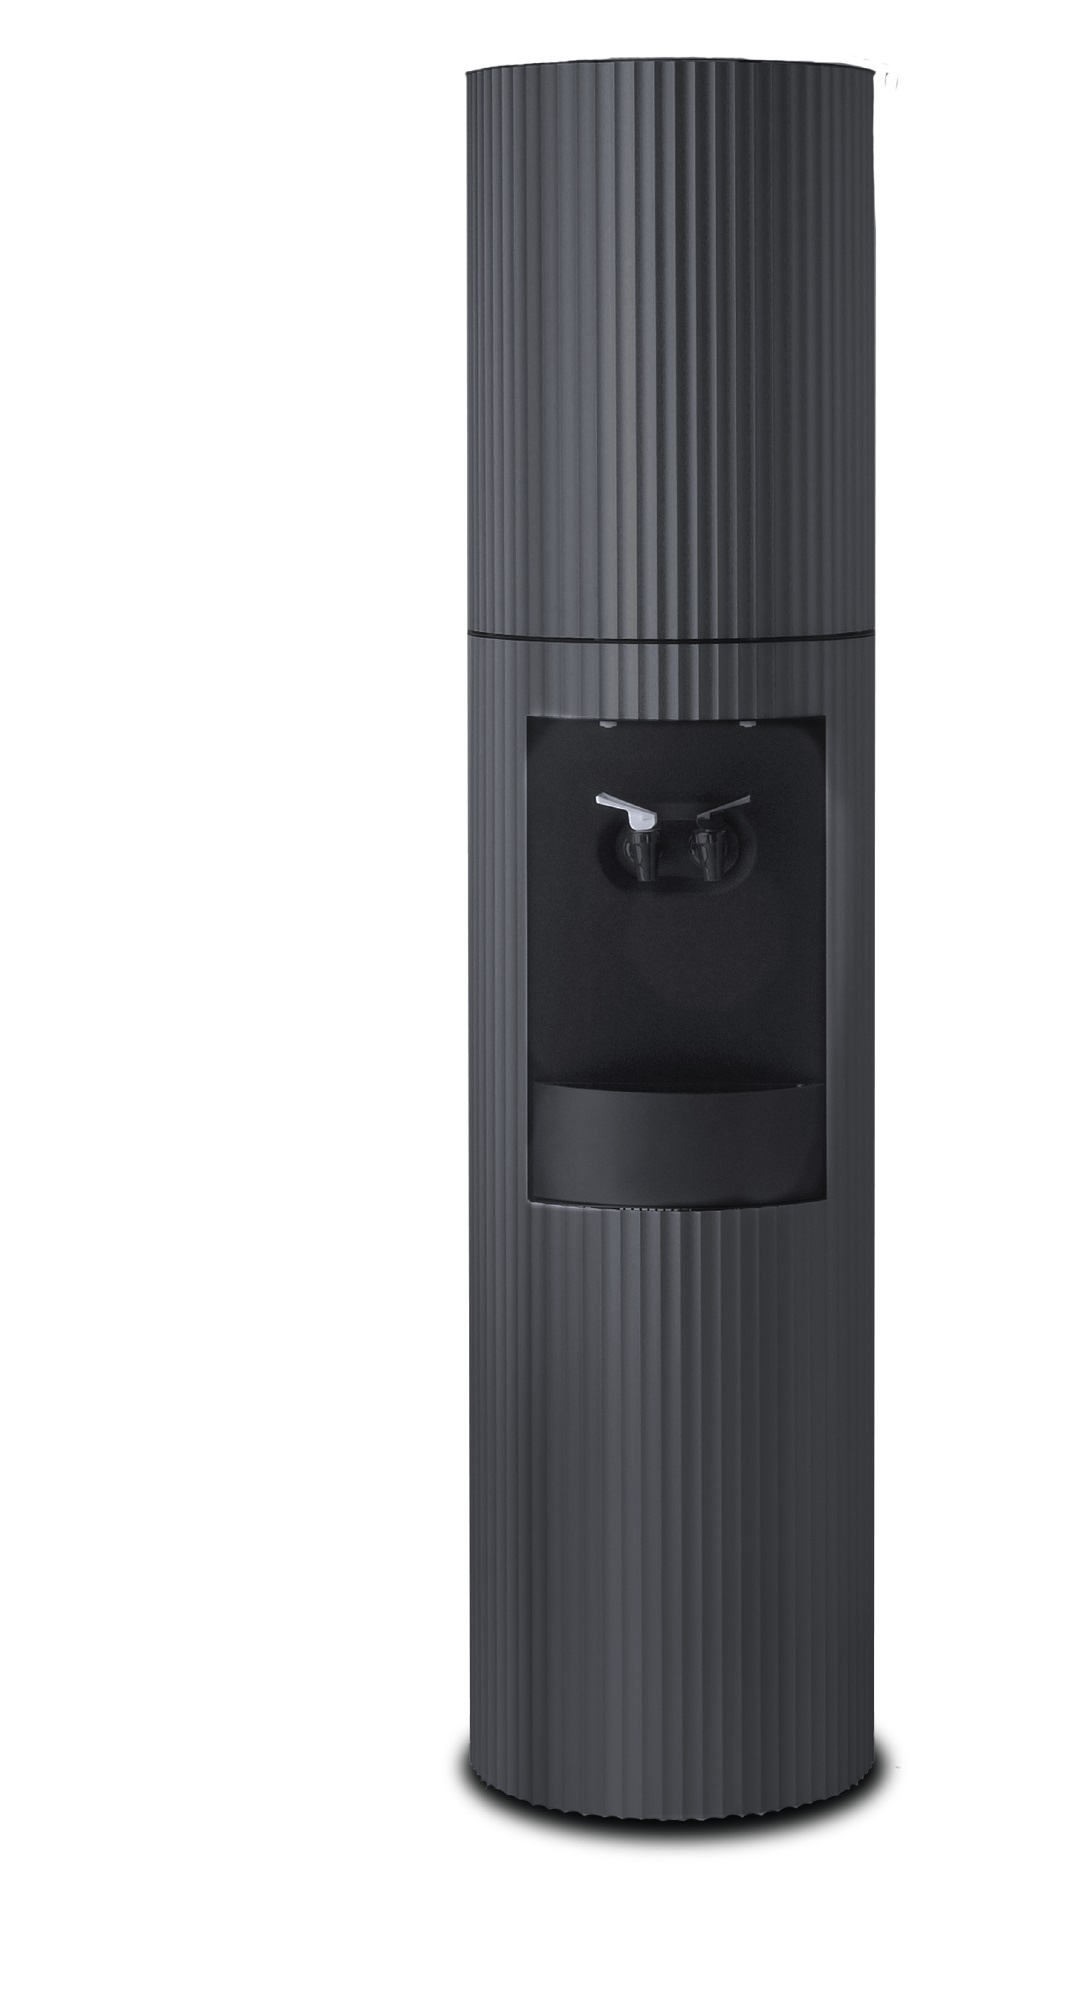 Celsius Bottleless Water Cooler in Fluted Aluminum with Powder Coated Black Finish - Cold/Cold